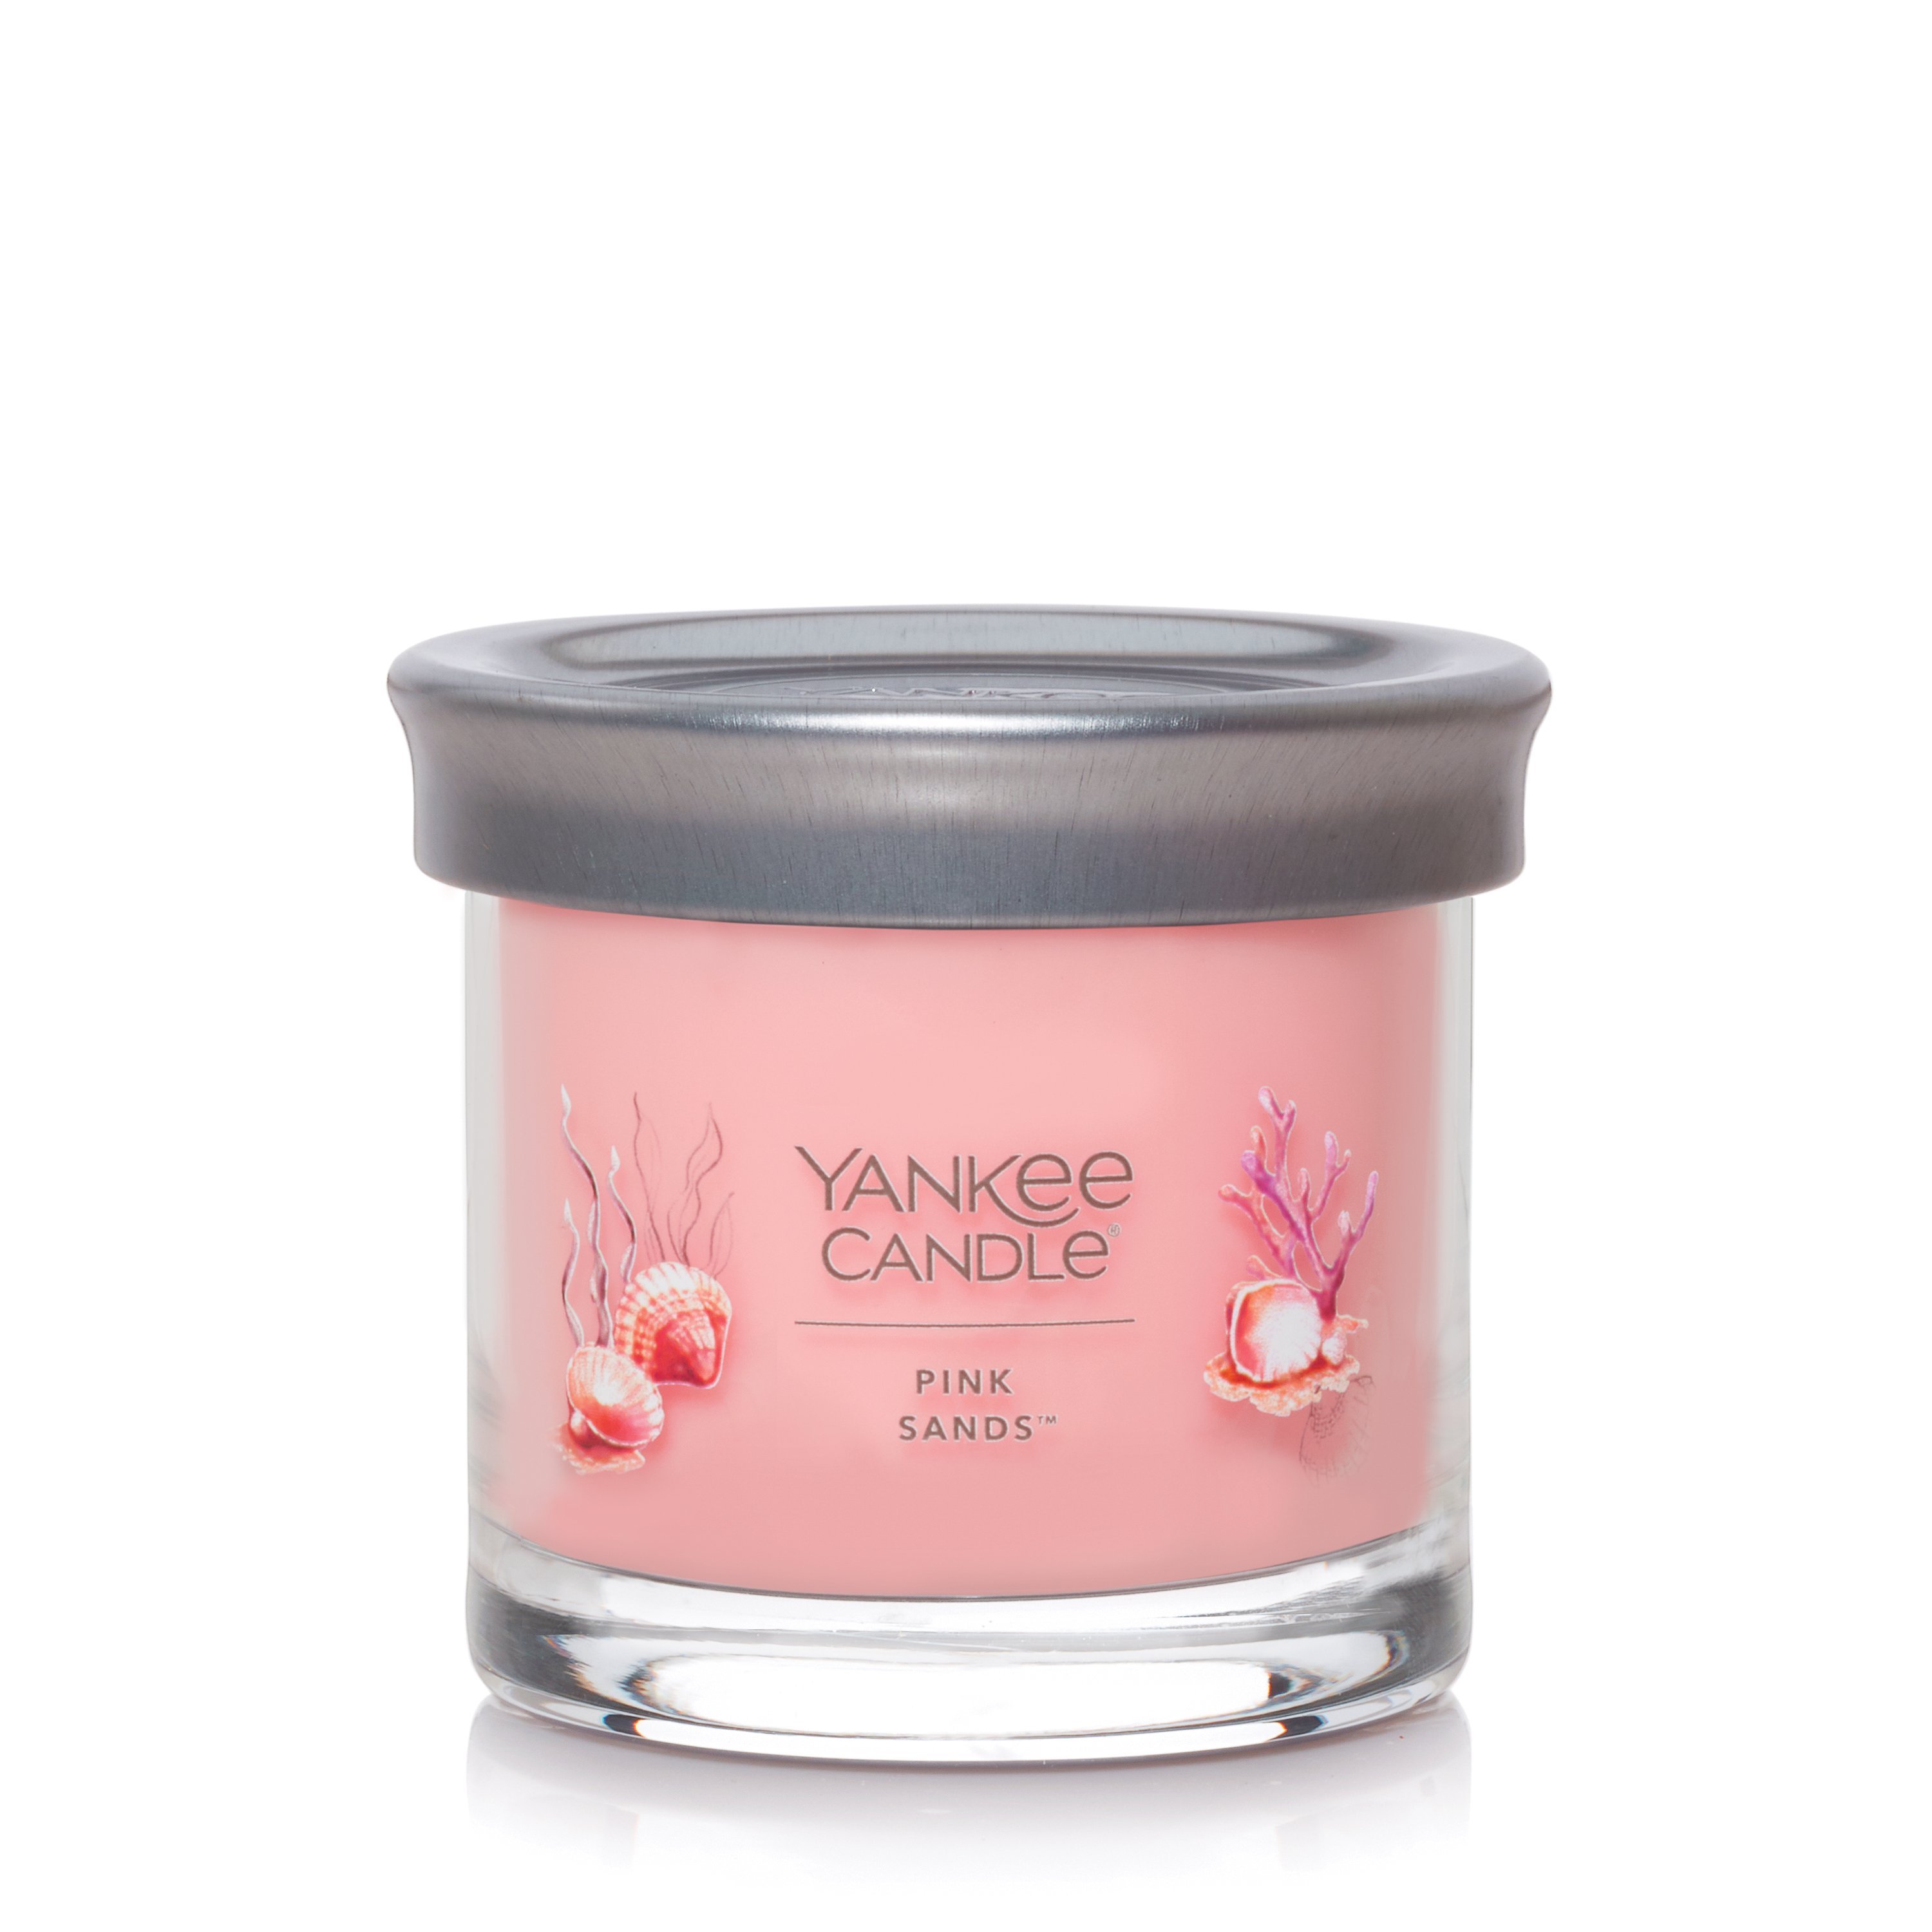 Yankee Candle Pink Sands - Large Single Wick Jar Candle